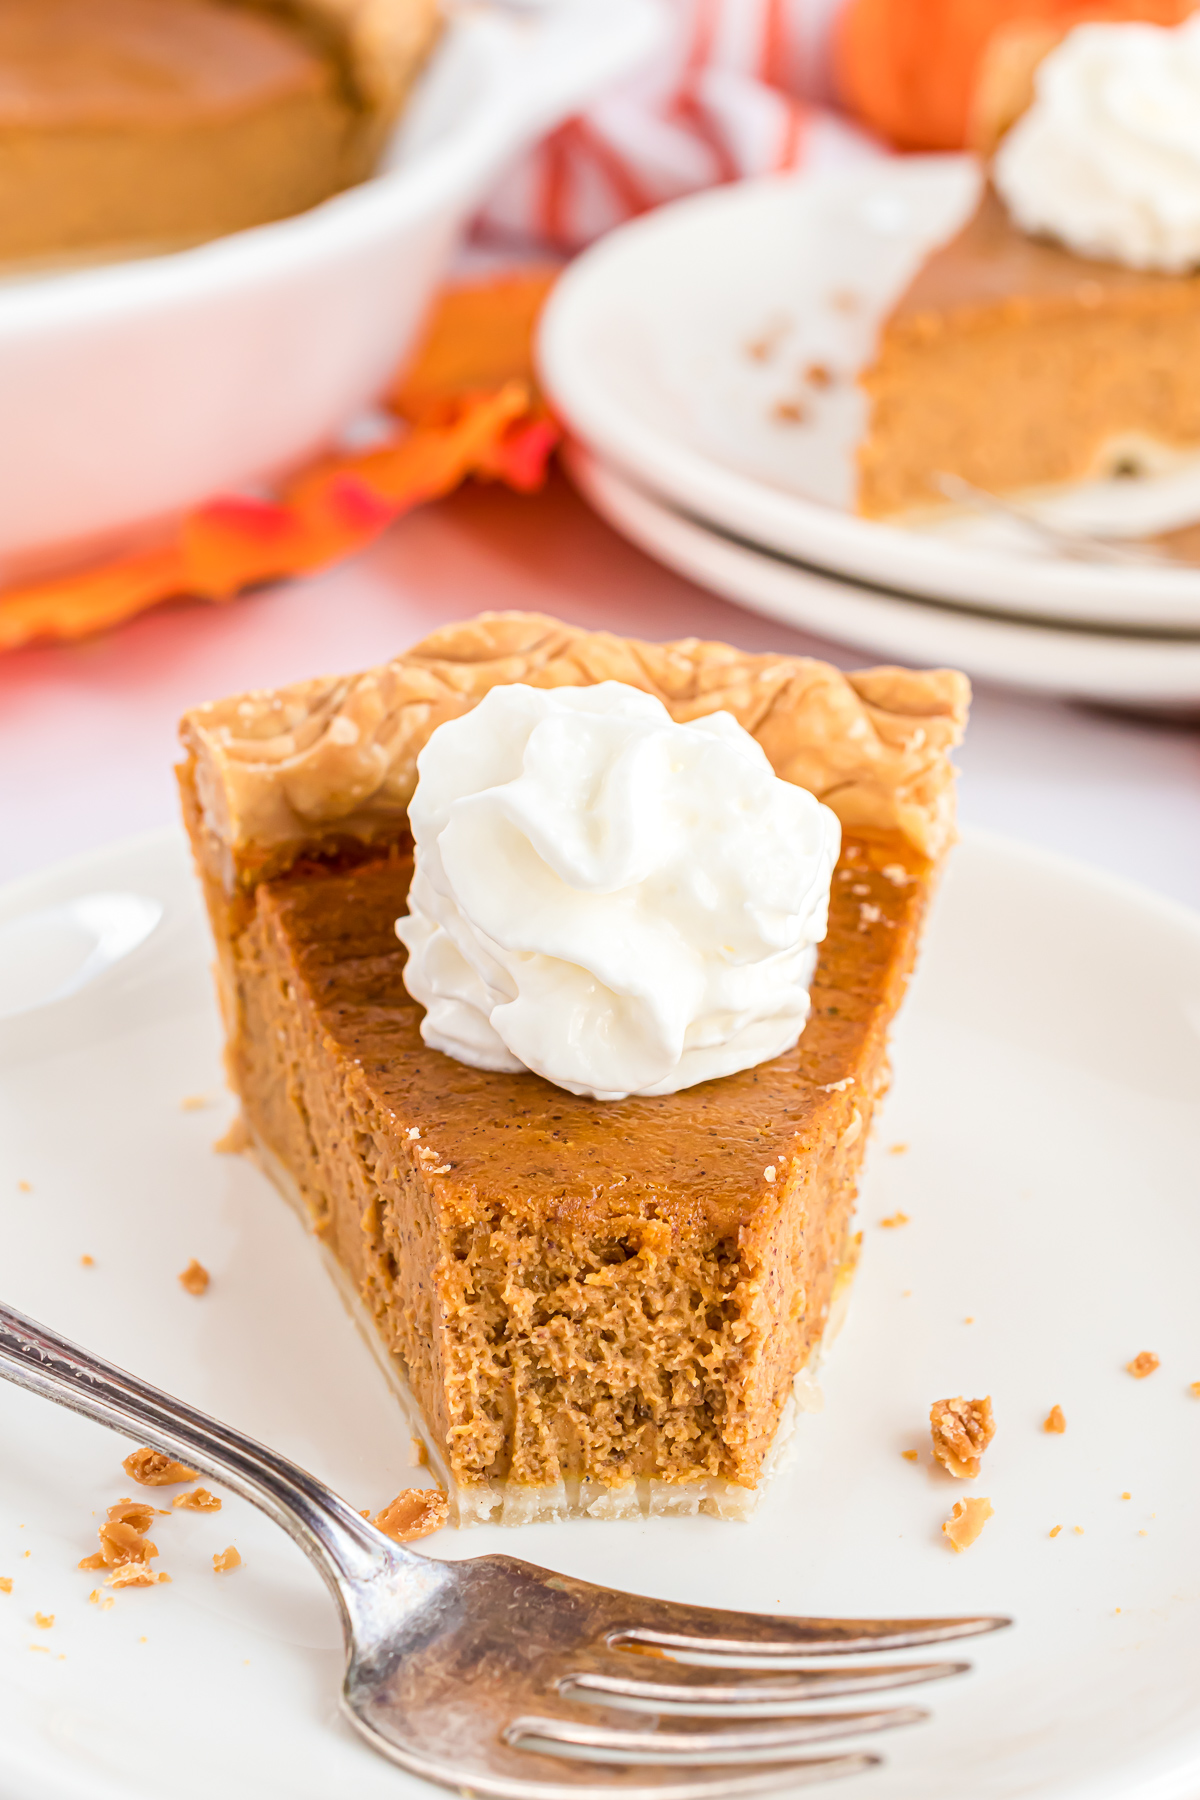 A slice of pumpkin pie with a bite taken out of it with a fork.